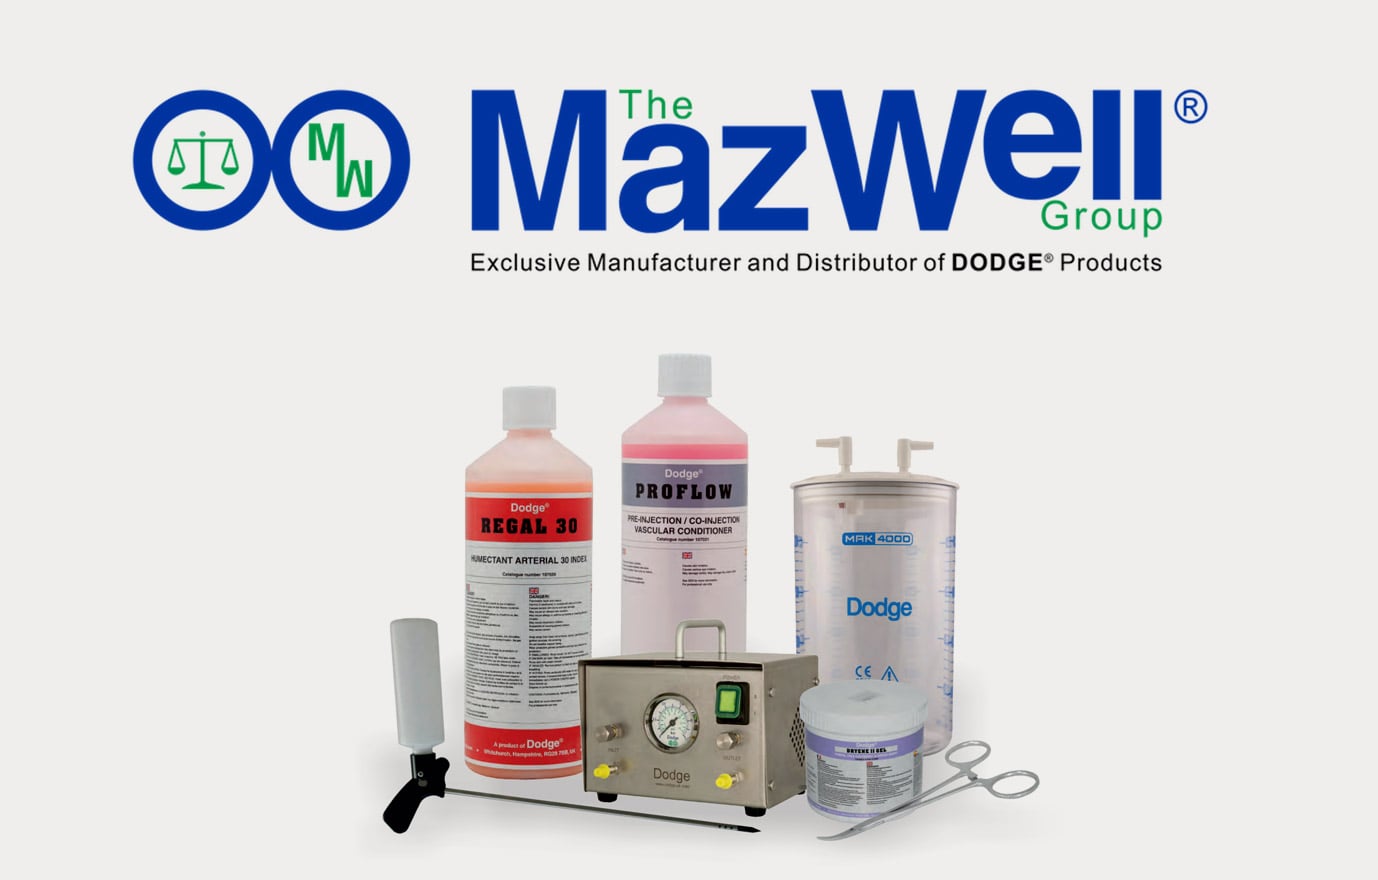 mazwell-group-dodge-products-min